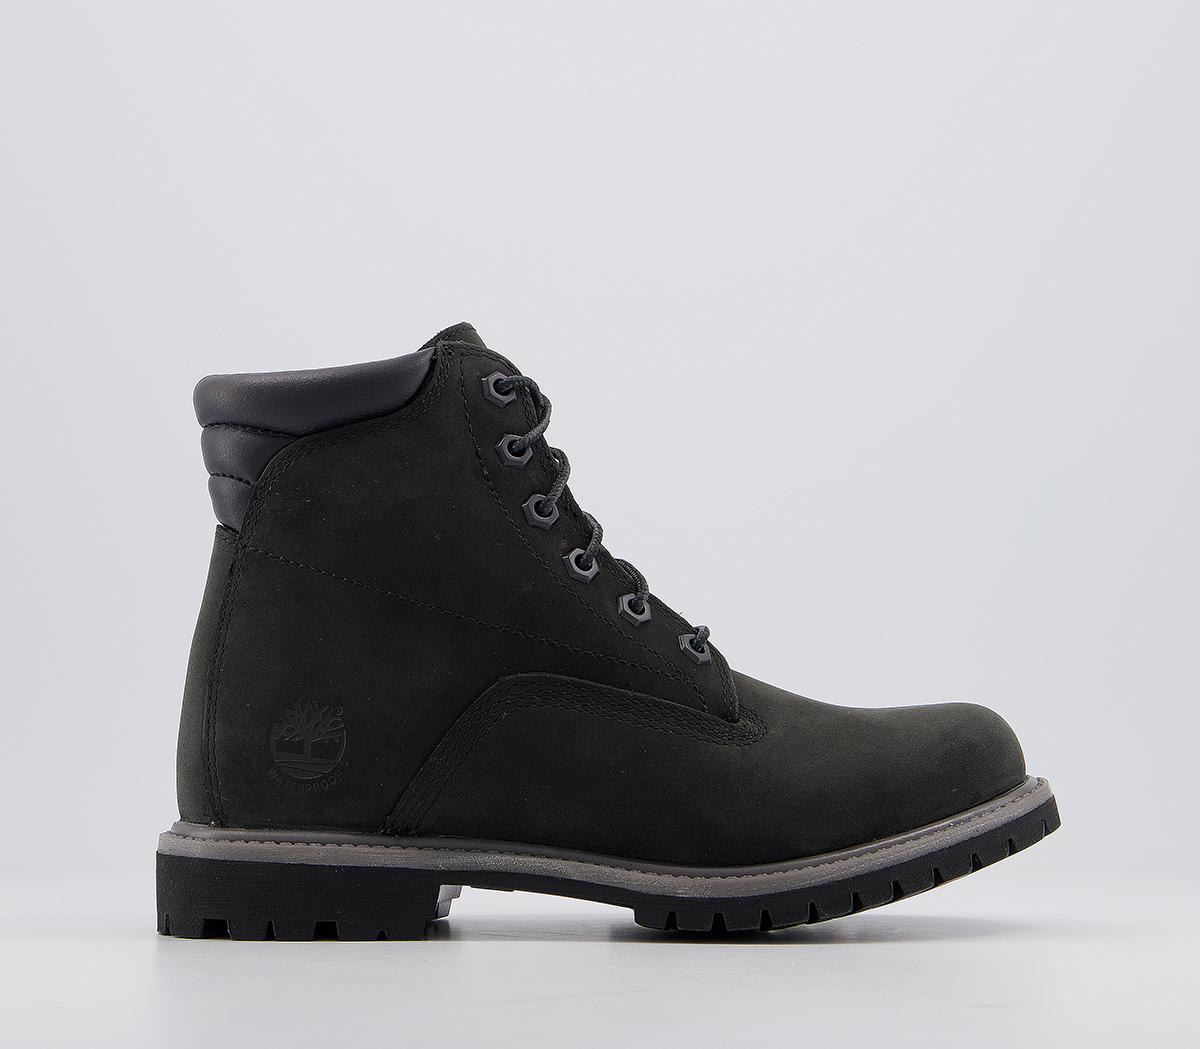 Timberland Waterville 6 inch Boots Black Nubuck - Ankle Boots